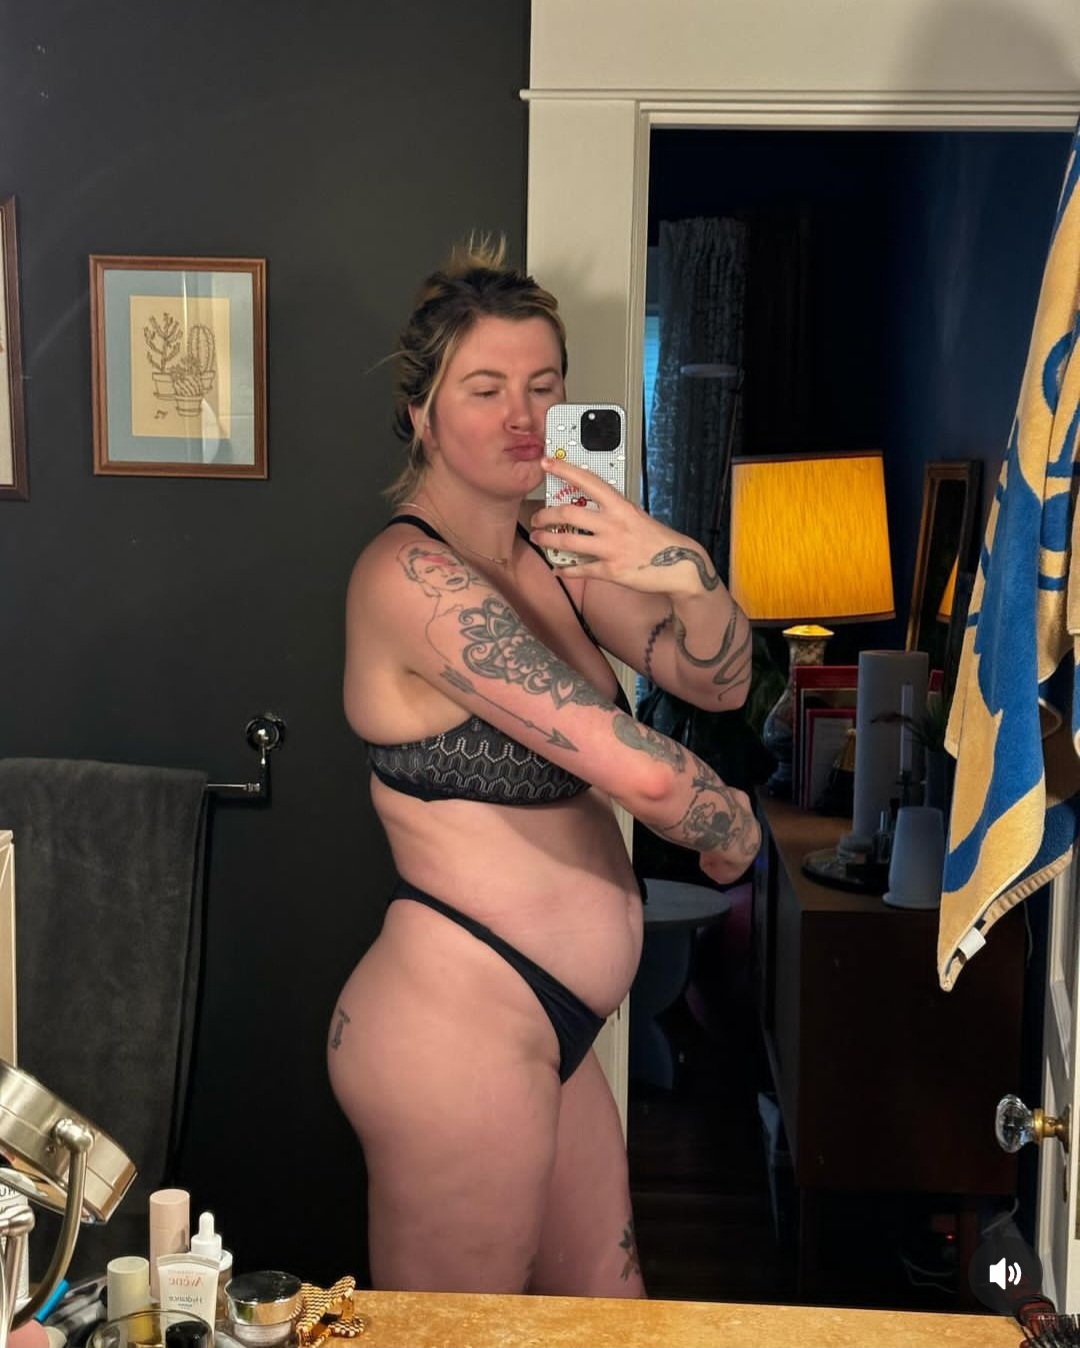 American model, Ireland Baldwin shares candid photos of her postpartum body 9 months after welcoming first child